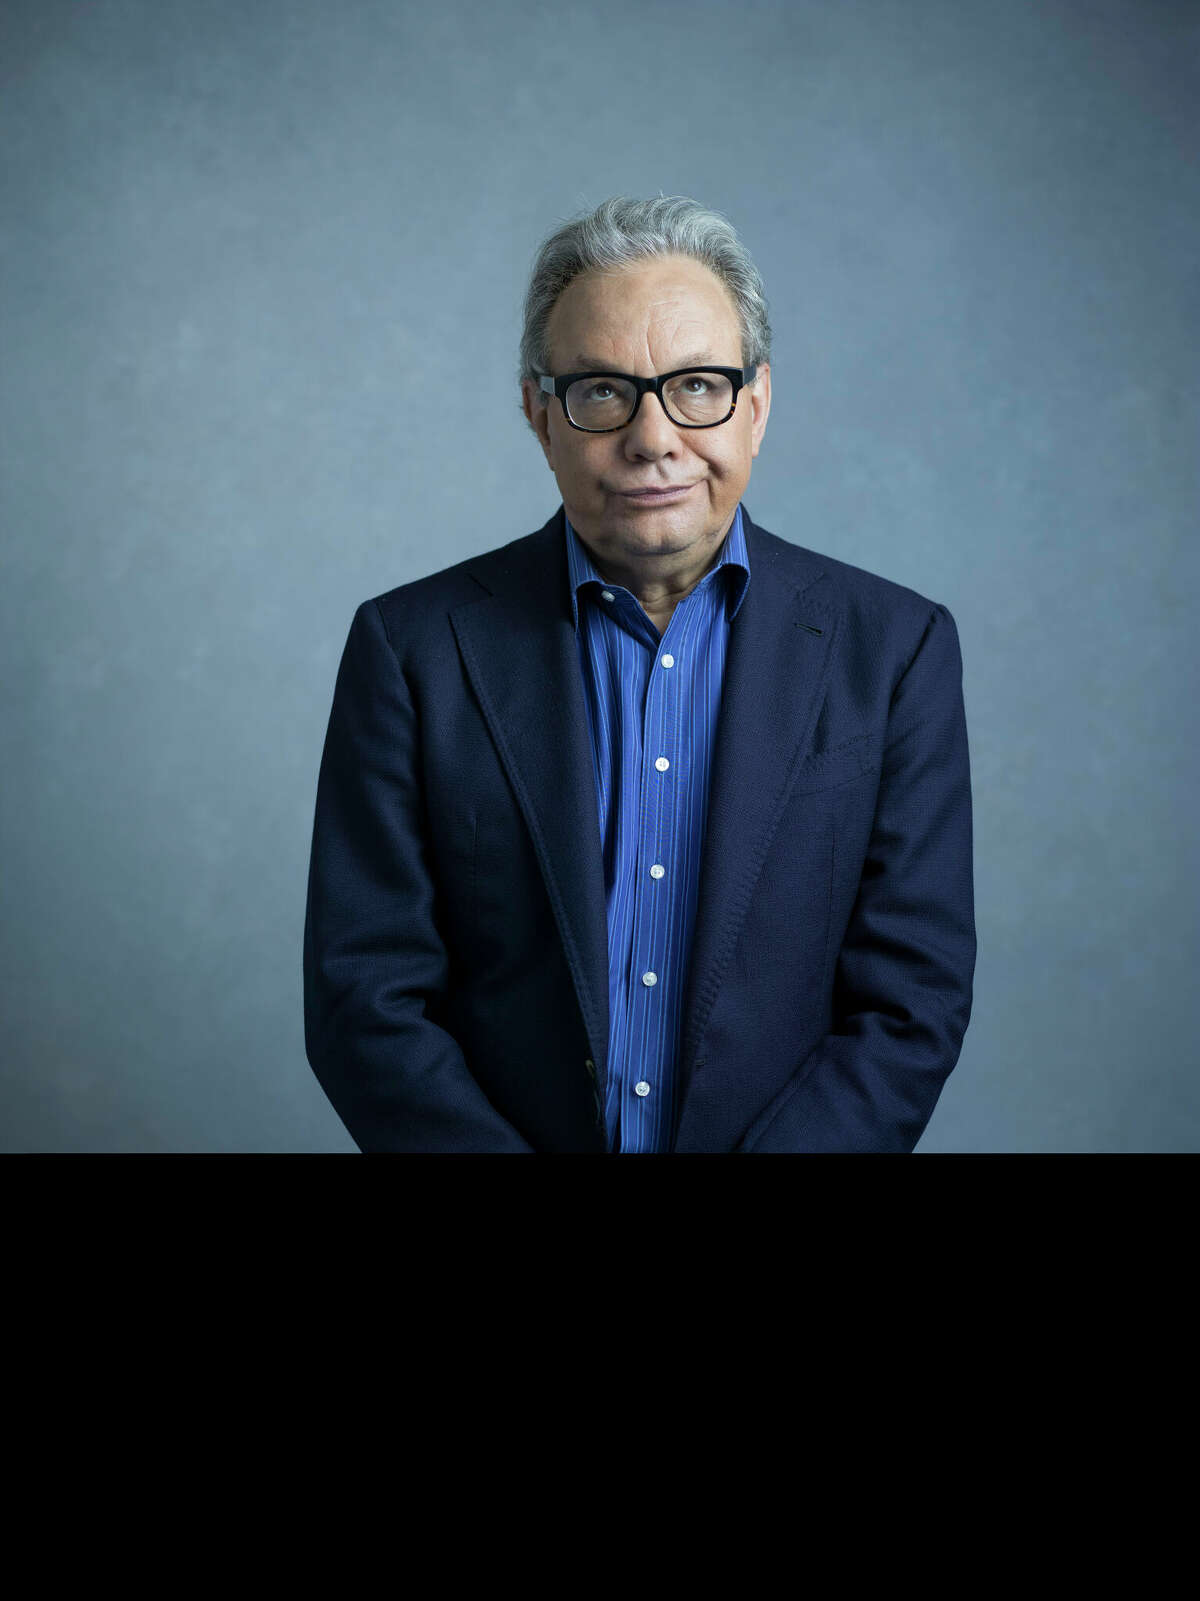 Lewis Black plays The Capitol Theatre on Sunday March 27, at 8 p.m. For more information or to get tickets, visit The Capitol Theatre here. 